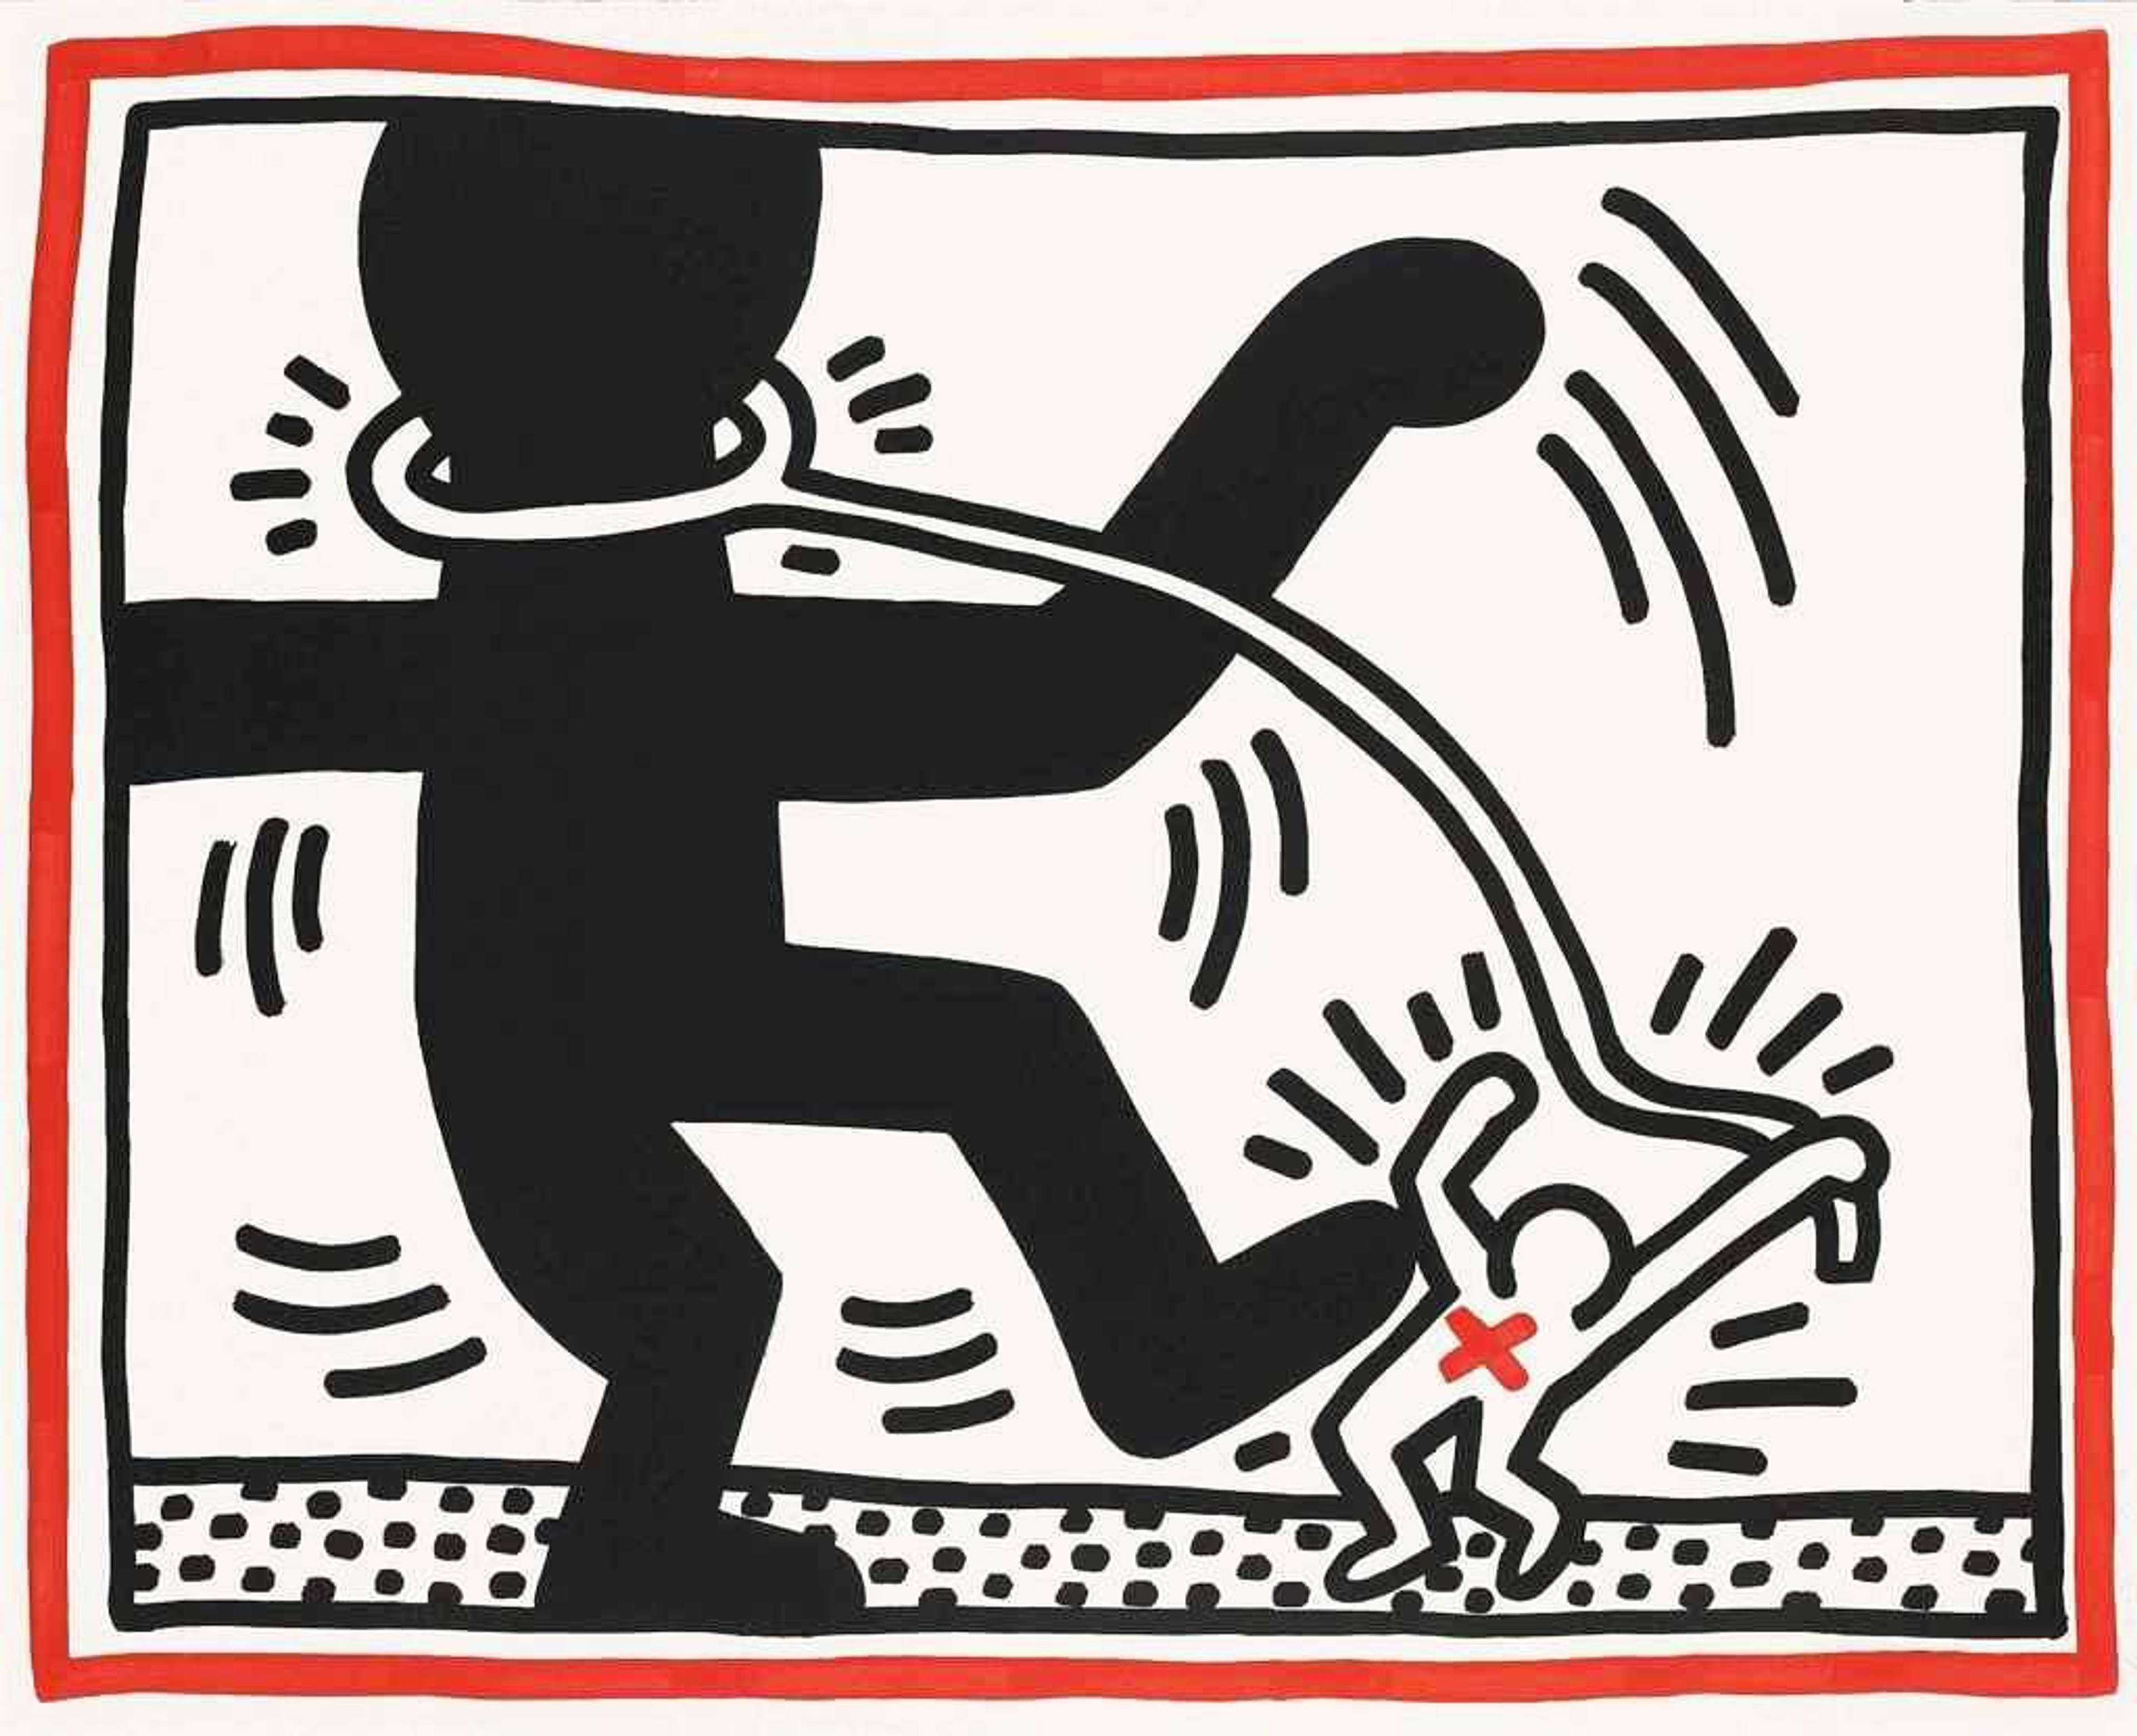 Keith Haring’s Free South Africa 2. A Pop Art print of a black figure raising its foot, stepping on the outline of a white figure.